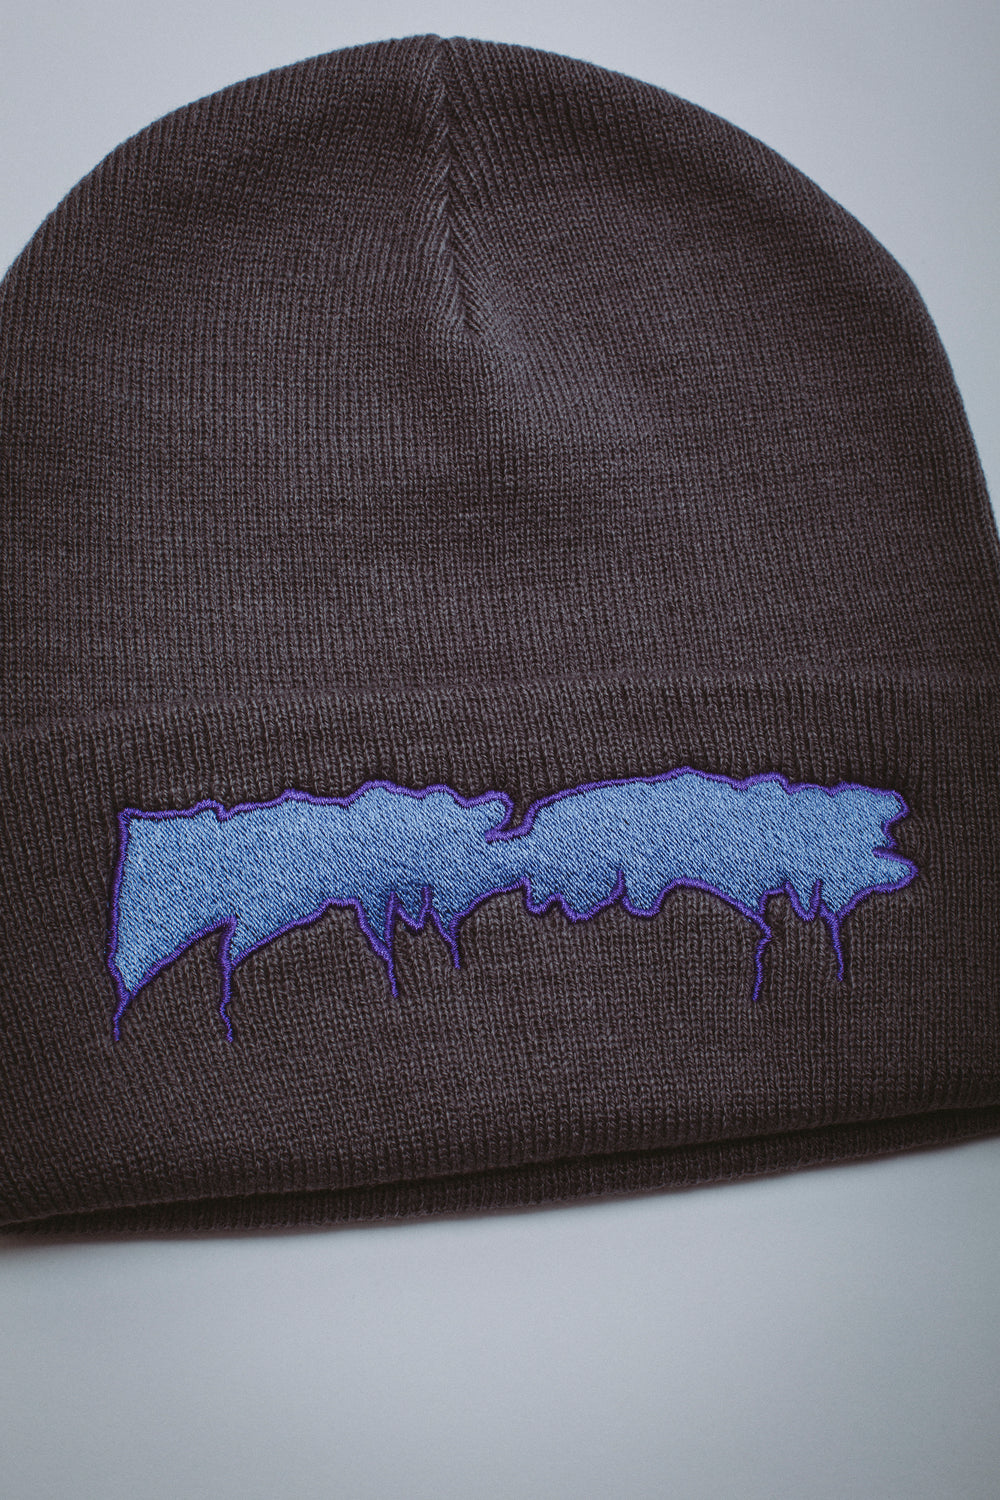 Wolf Pack- Embroidered Beanie – Mind Over Matter Athlete